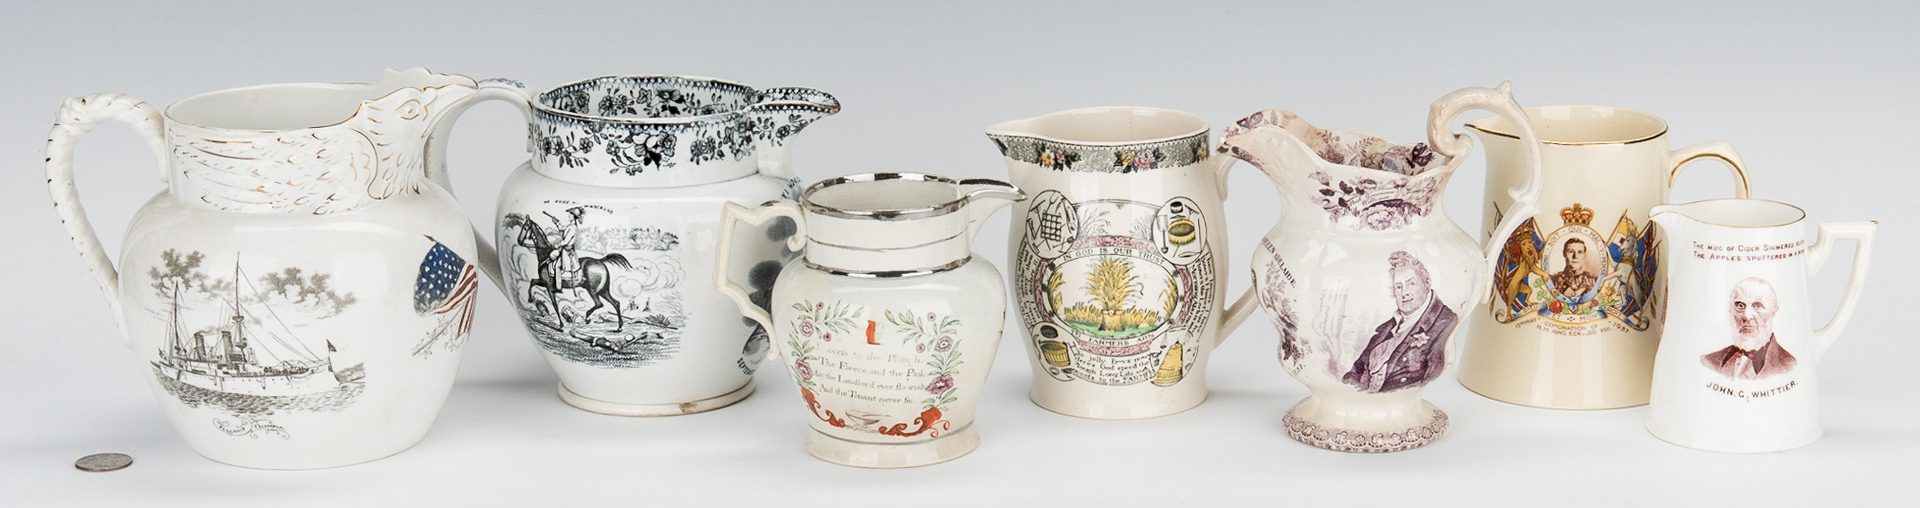 Lot 241: 7 Historical Transferware Pitchers incl. Waterloo, Farmers Arms